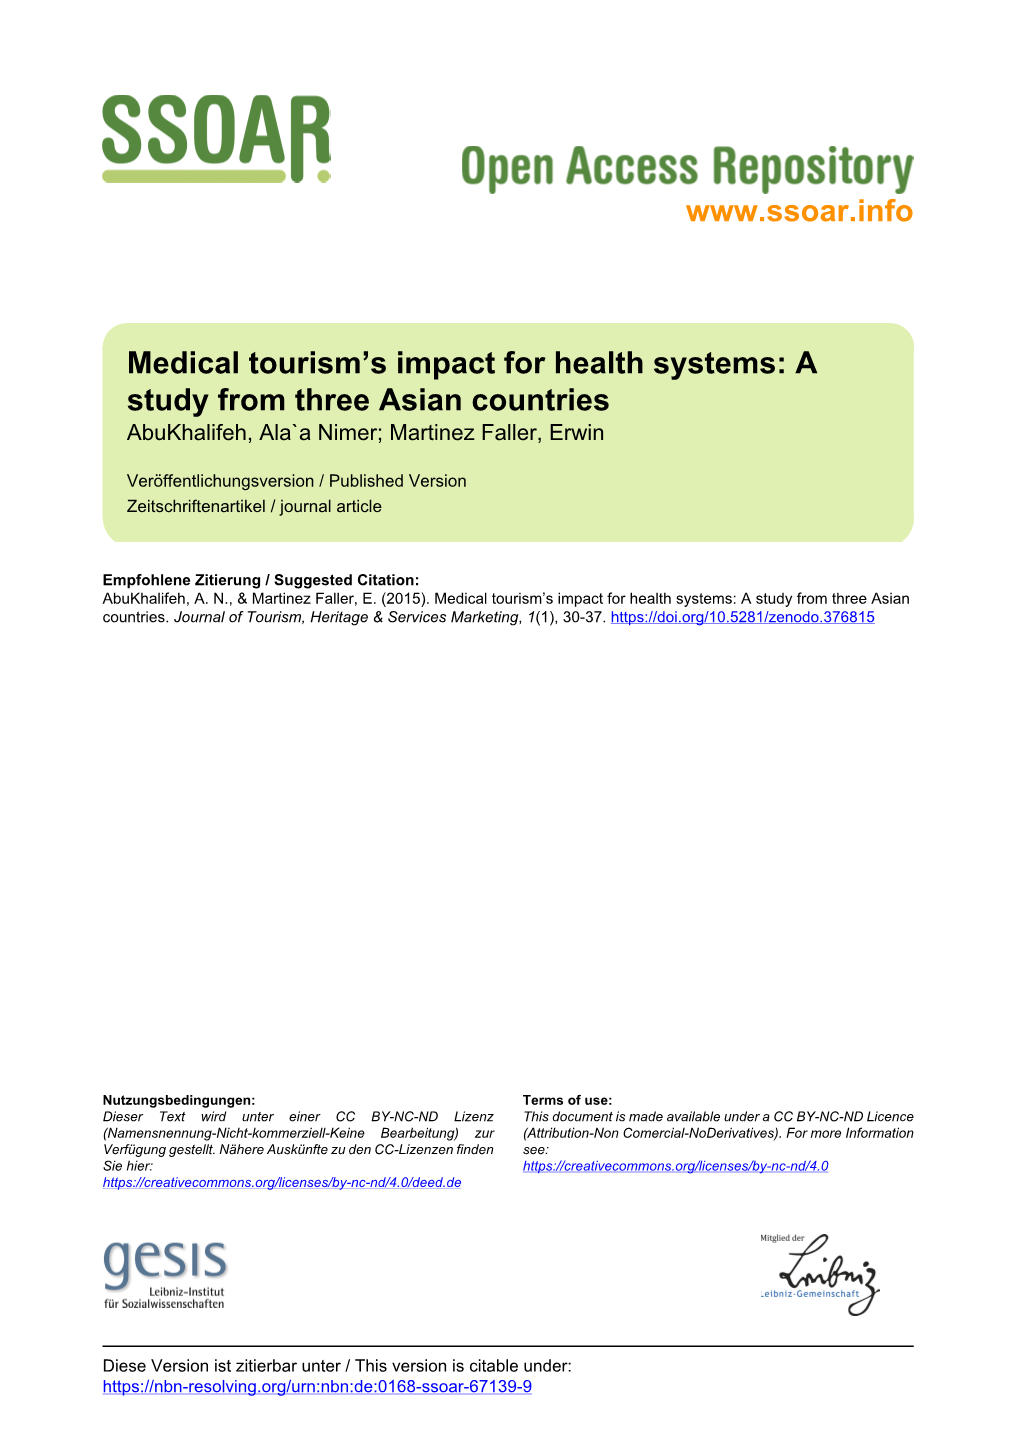 Medical Tourism's Impact for Health Systems: a Study from Three Asian Countries